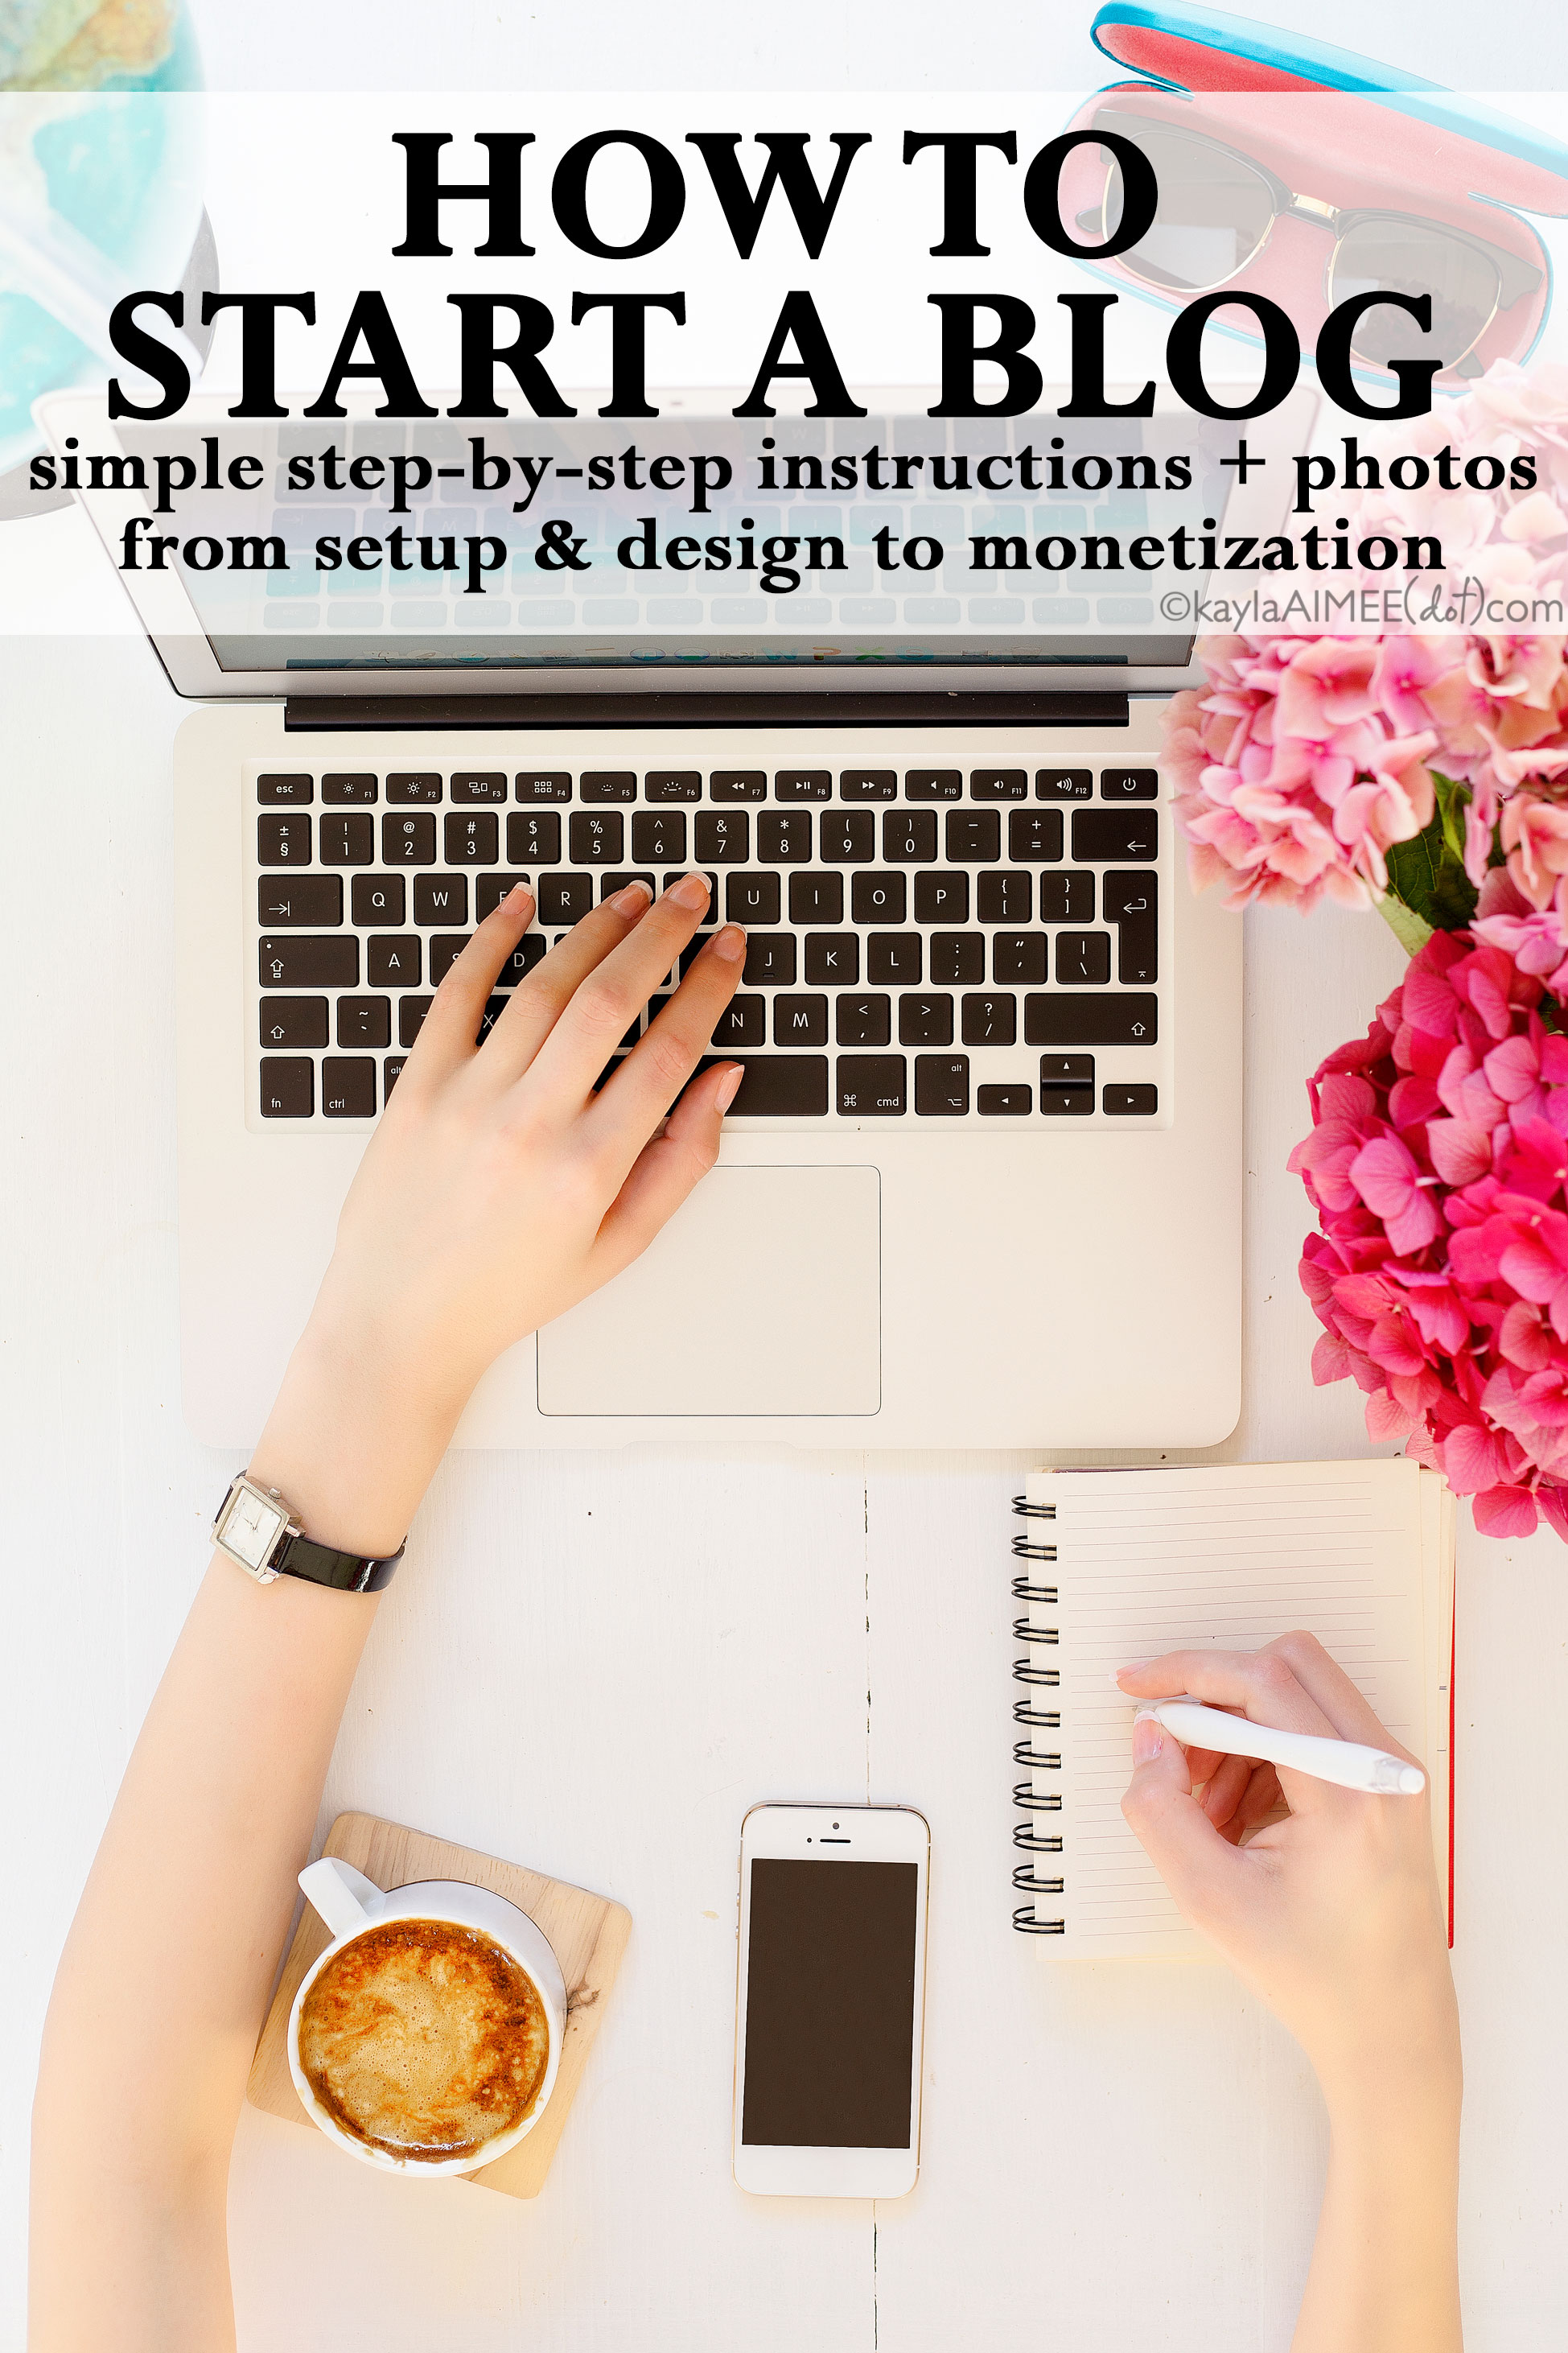 How To Start A Blog: Simple Step-By-Step Instructions With Photos! (From hosting to setting up wordpress to designing!)